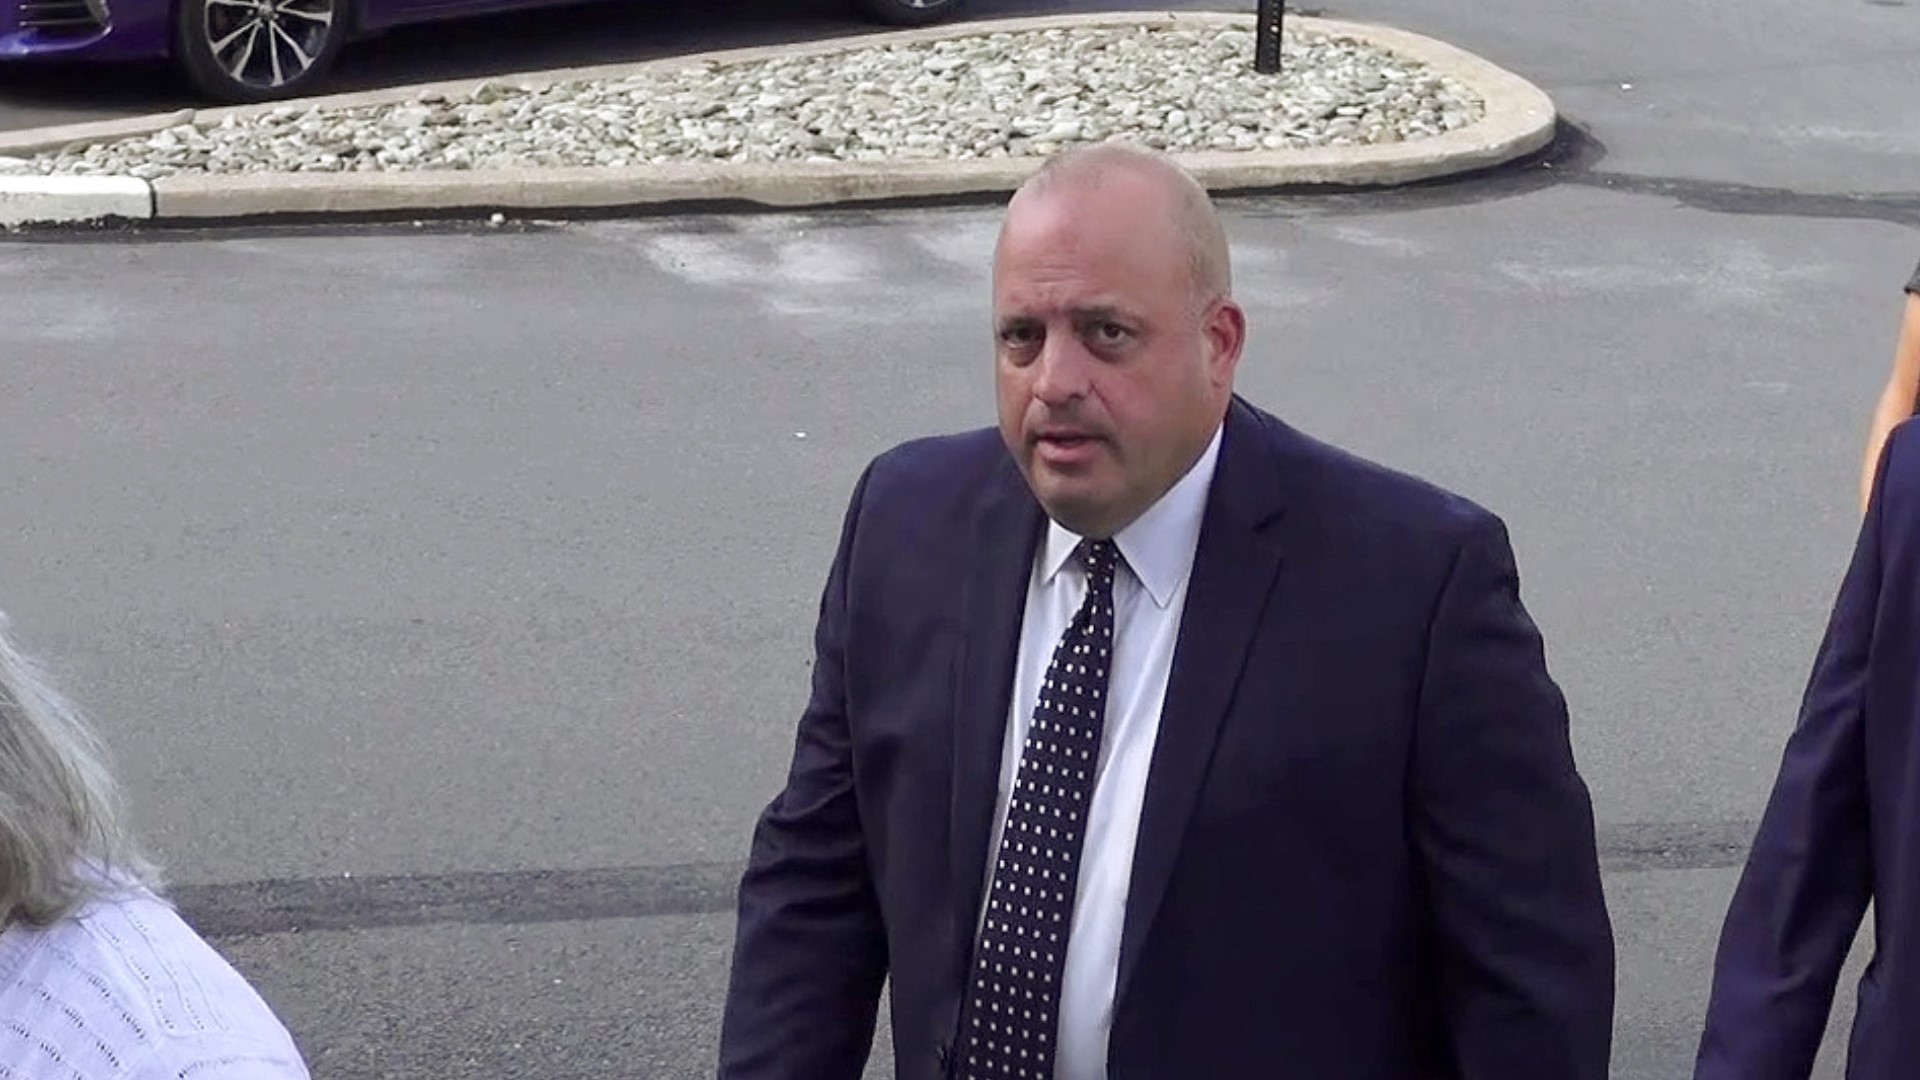 State police allege the former Assistant District Attorney took advantage of vulnerable women, offering legal representation and money in exchange for sexual favors.